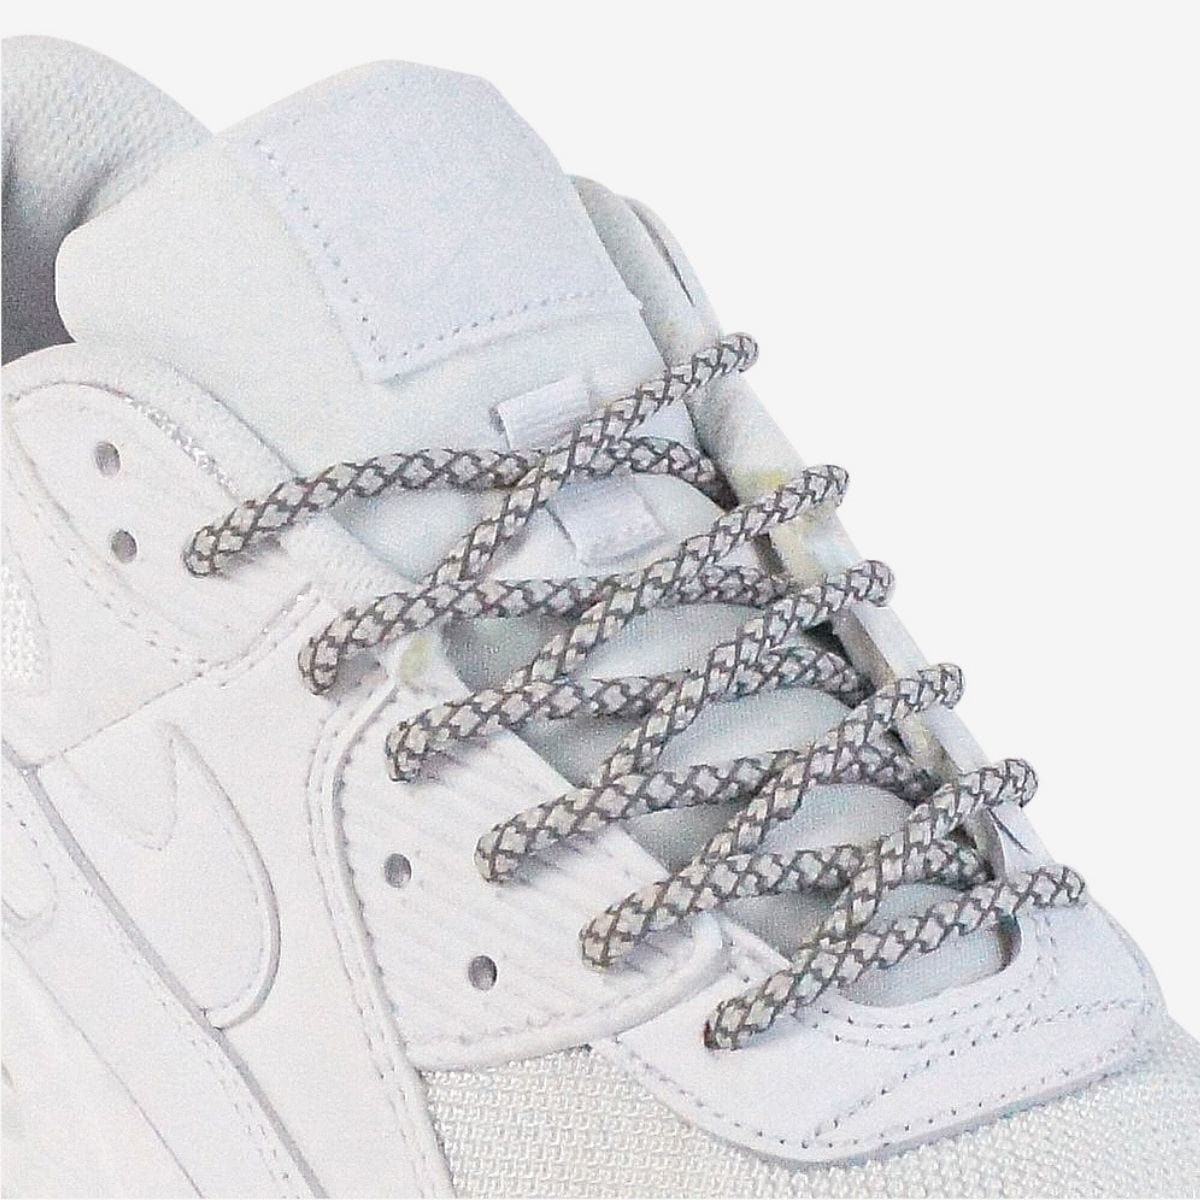 custom-color-shoelaces-on-white-sneakers-with-reflective-grey-laces